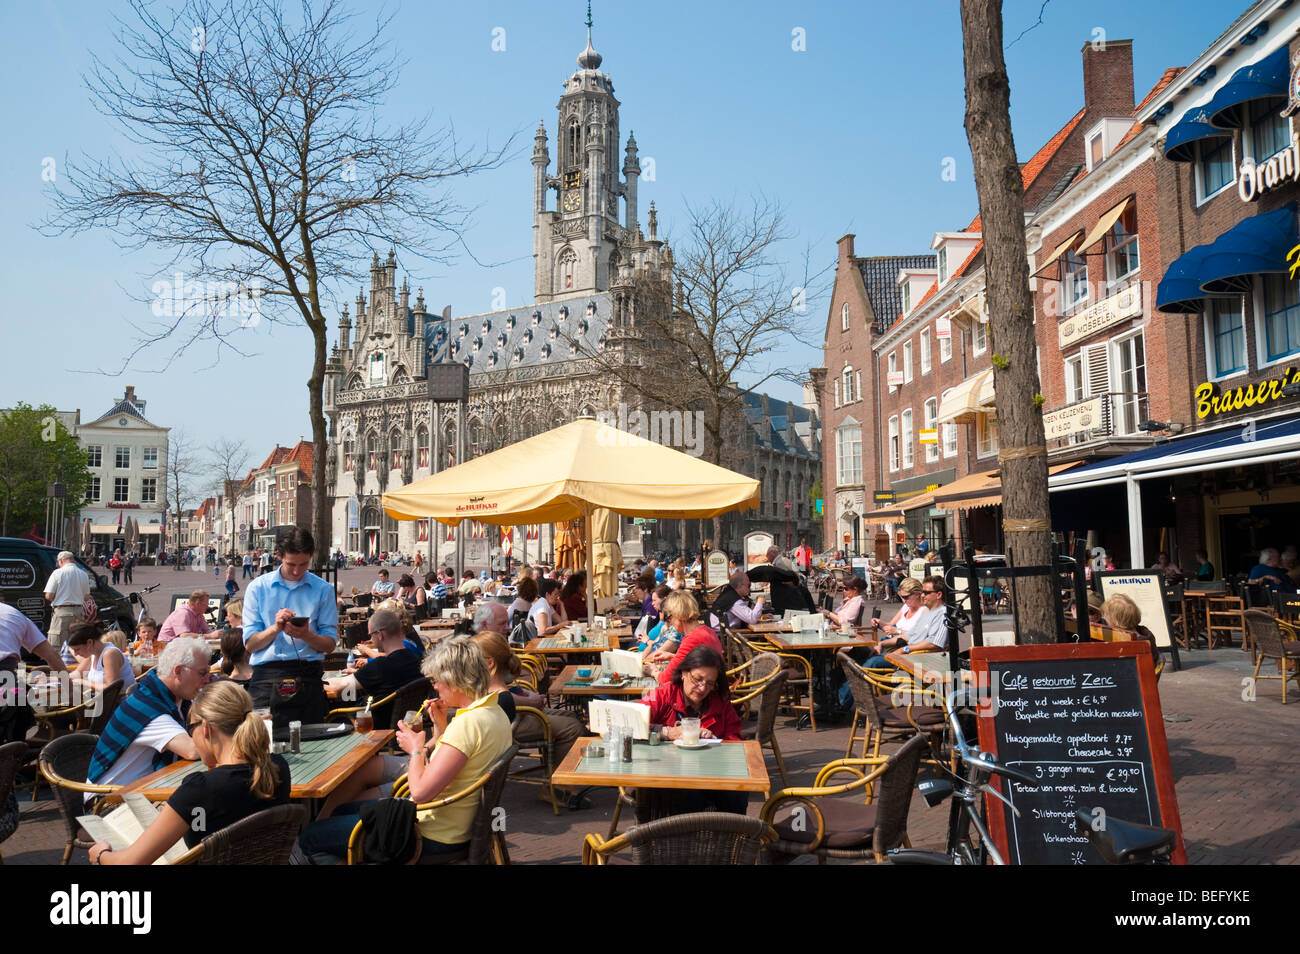 A street cafe at the market square in front of the late-Gothic town hall of Middelburg. Stock Photo